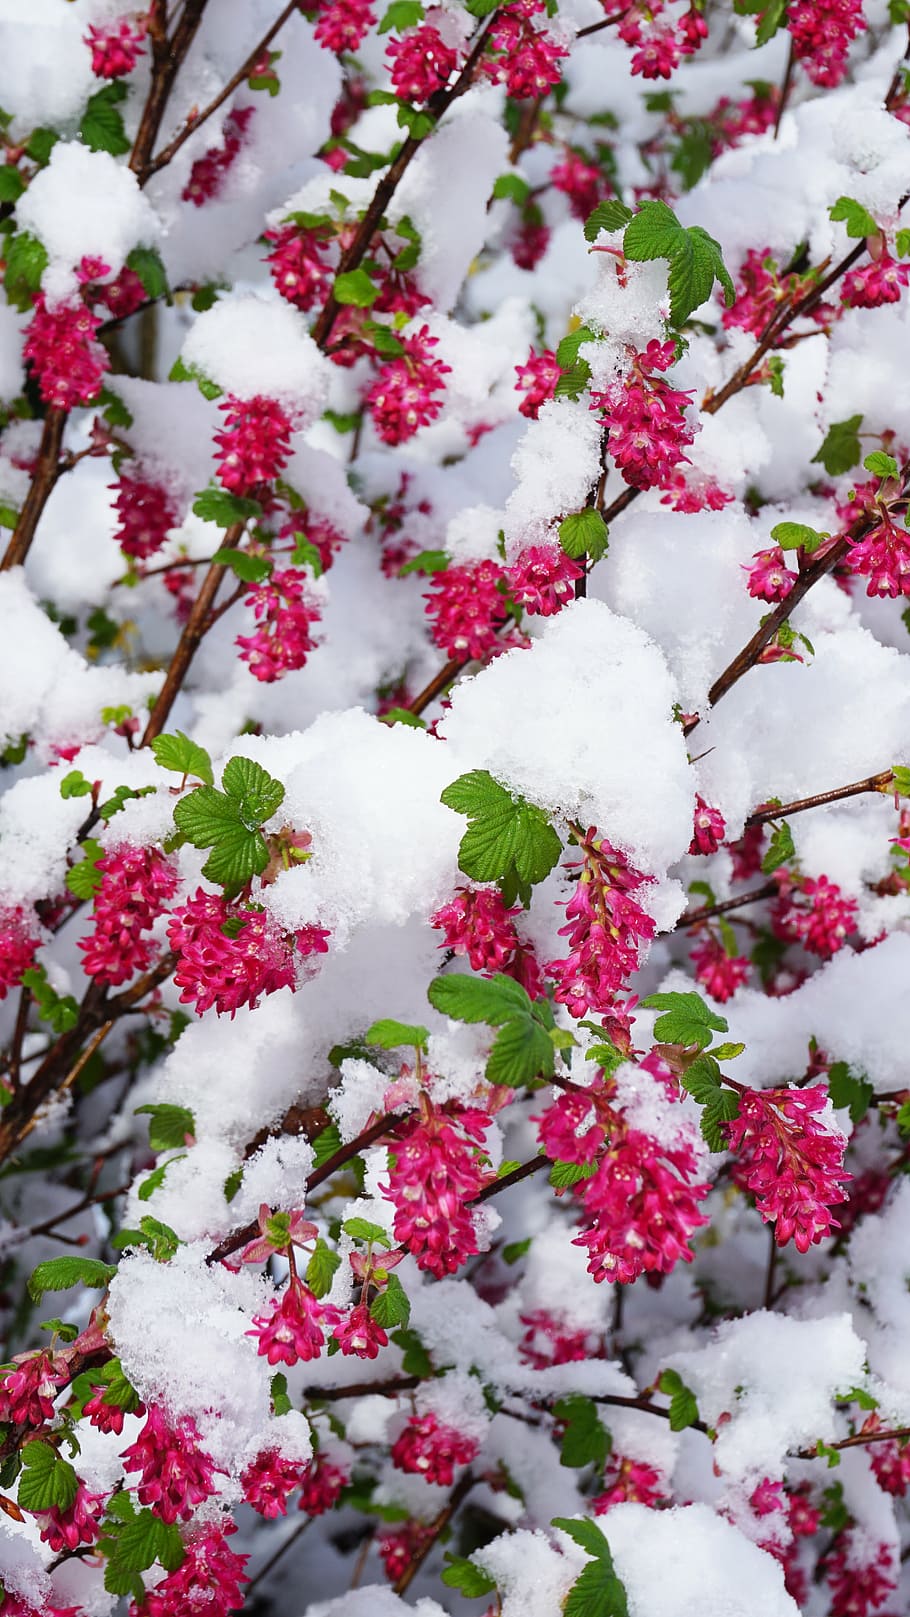 Free download Winter Flowers Image  Winter flowers Flowers Flower images